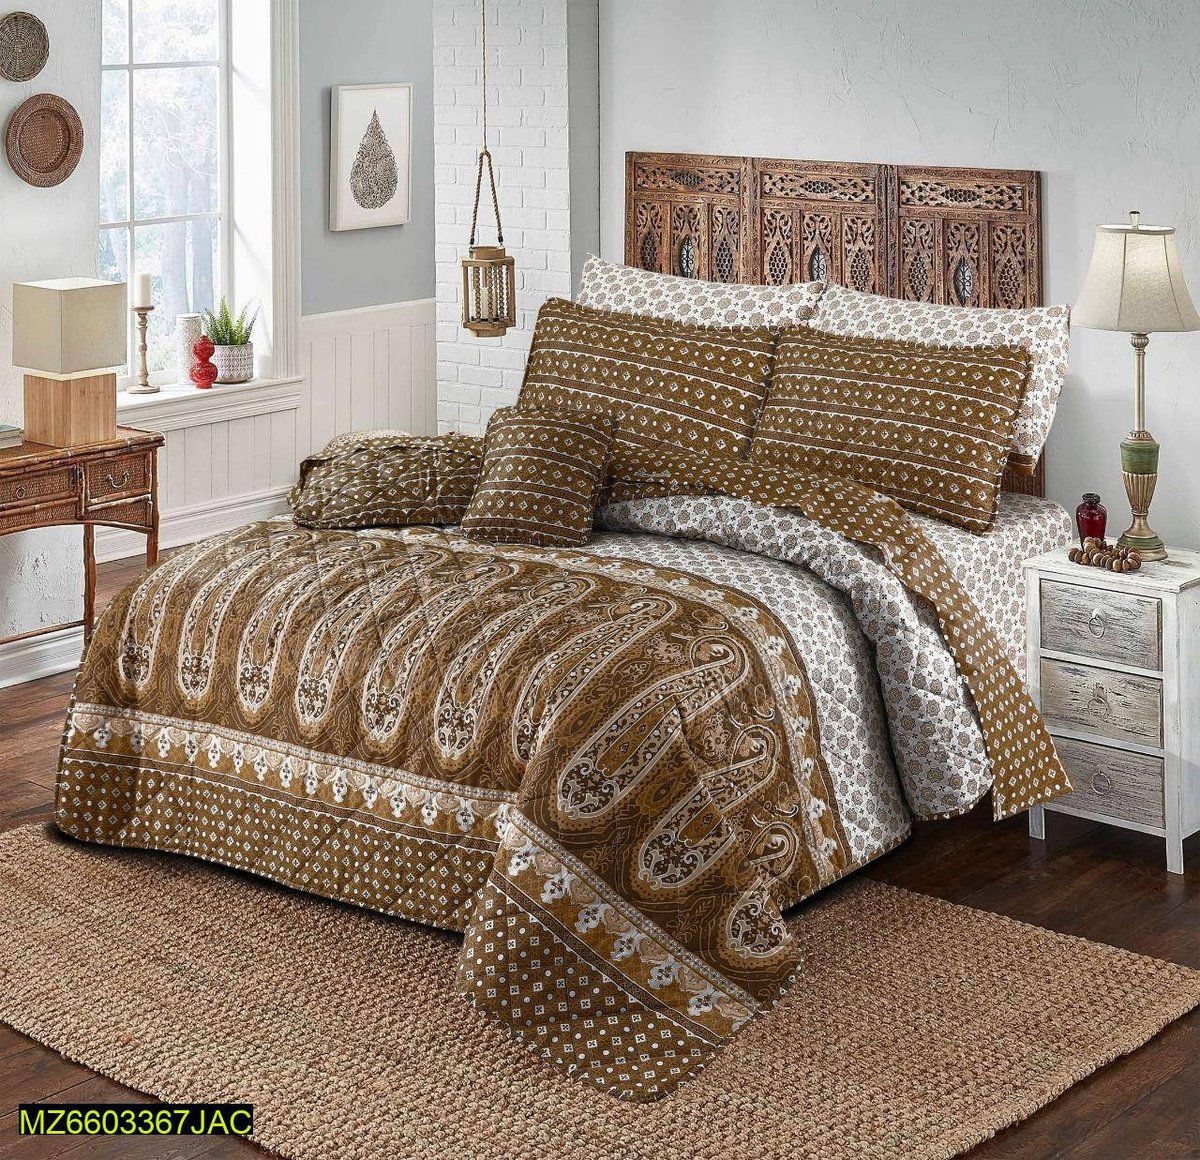 Fabric: Cotton Salonika
Product Type: Comforter Set
Pattern: Printed Double Bed Comforter Set
Size: Double Bed
#fashion#style#homedecor #bedding #comforters #comforterset #bedsheets